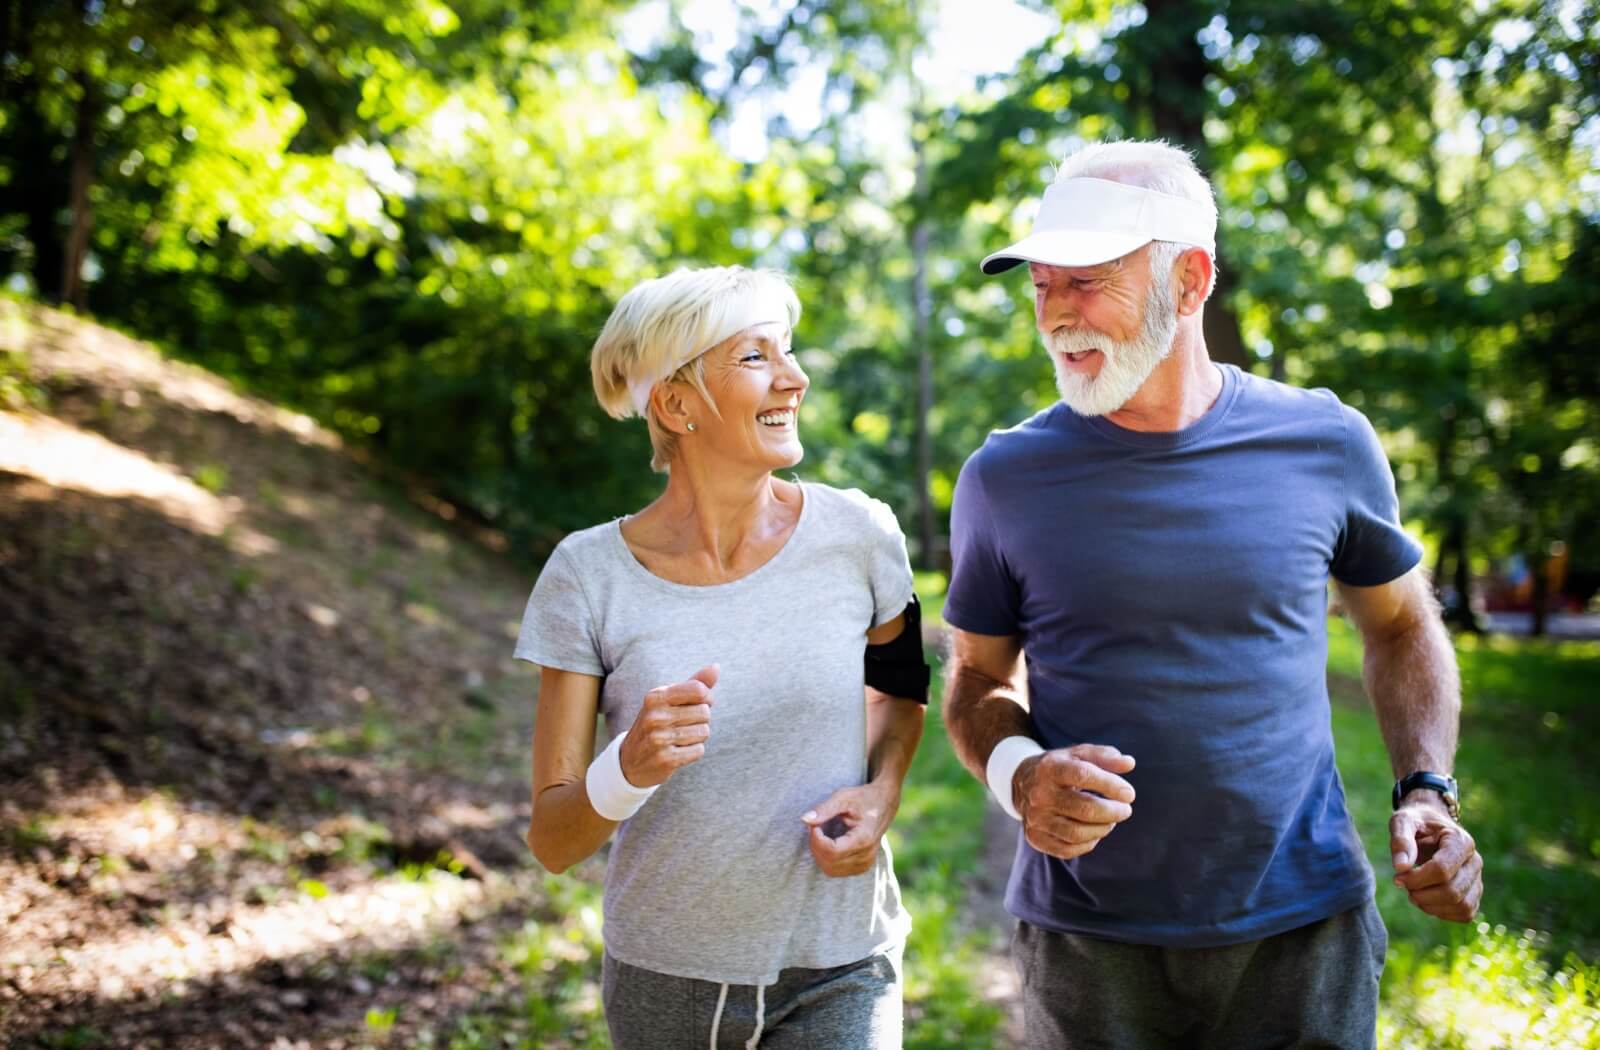 A senior couple happily jogging together outdoors.